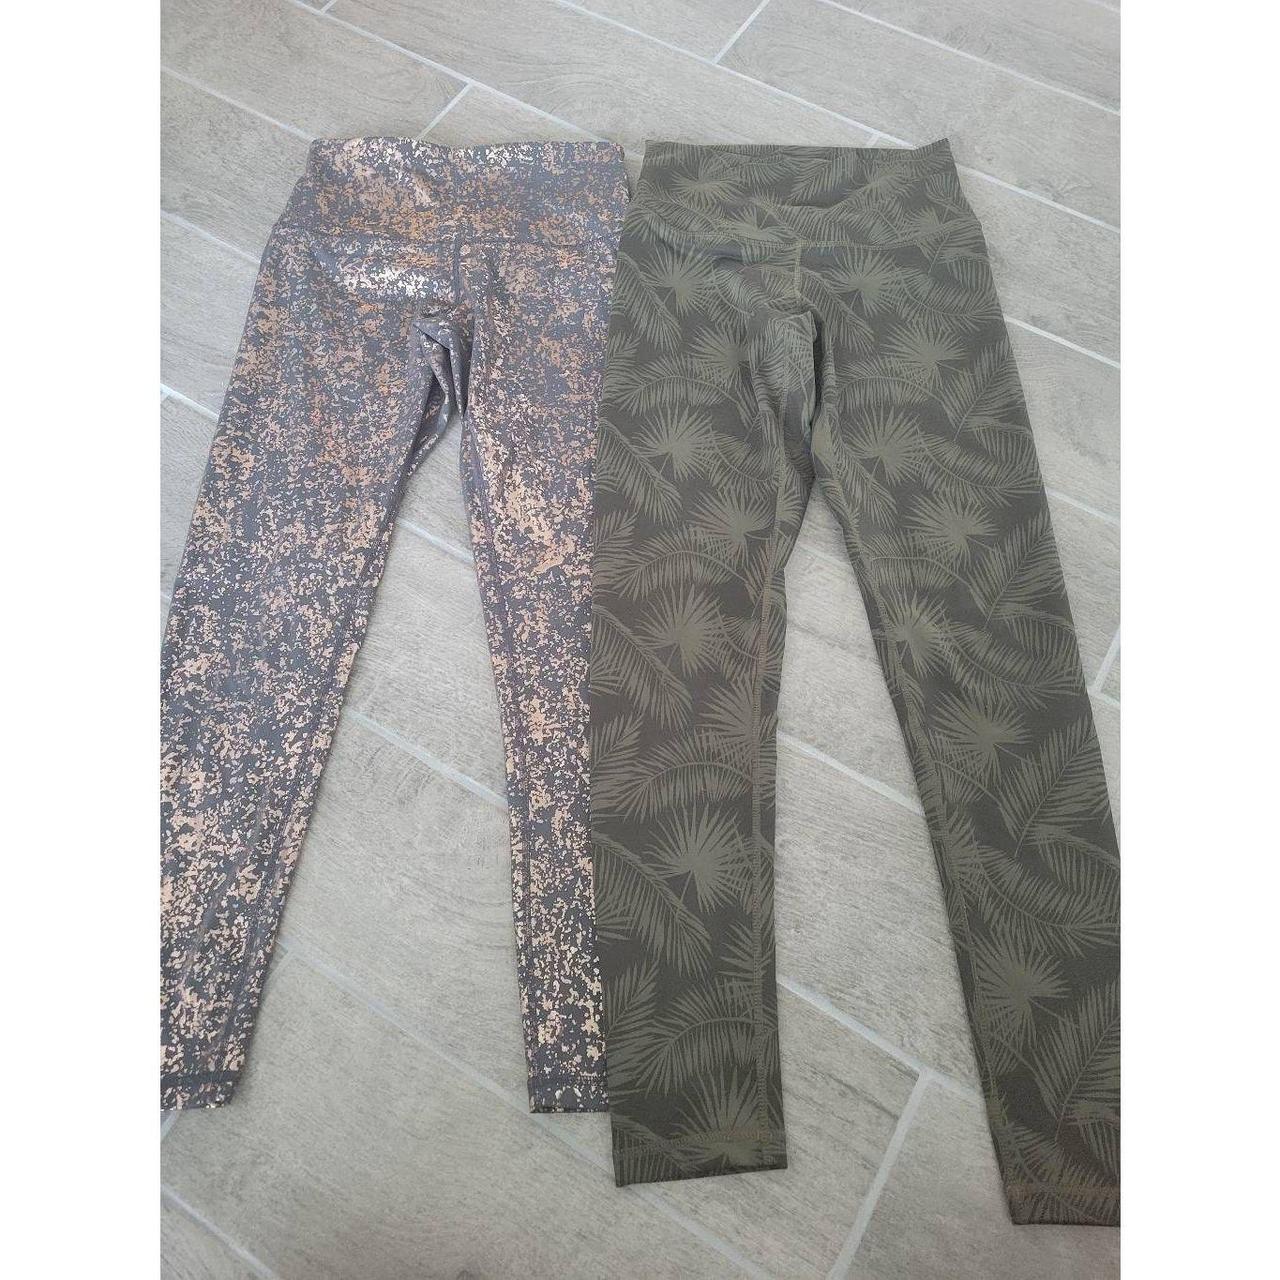 Two pairs of DYI active wear leggings. Grey and - Depop